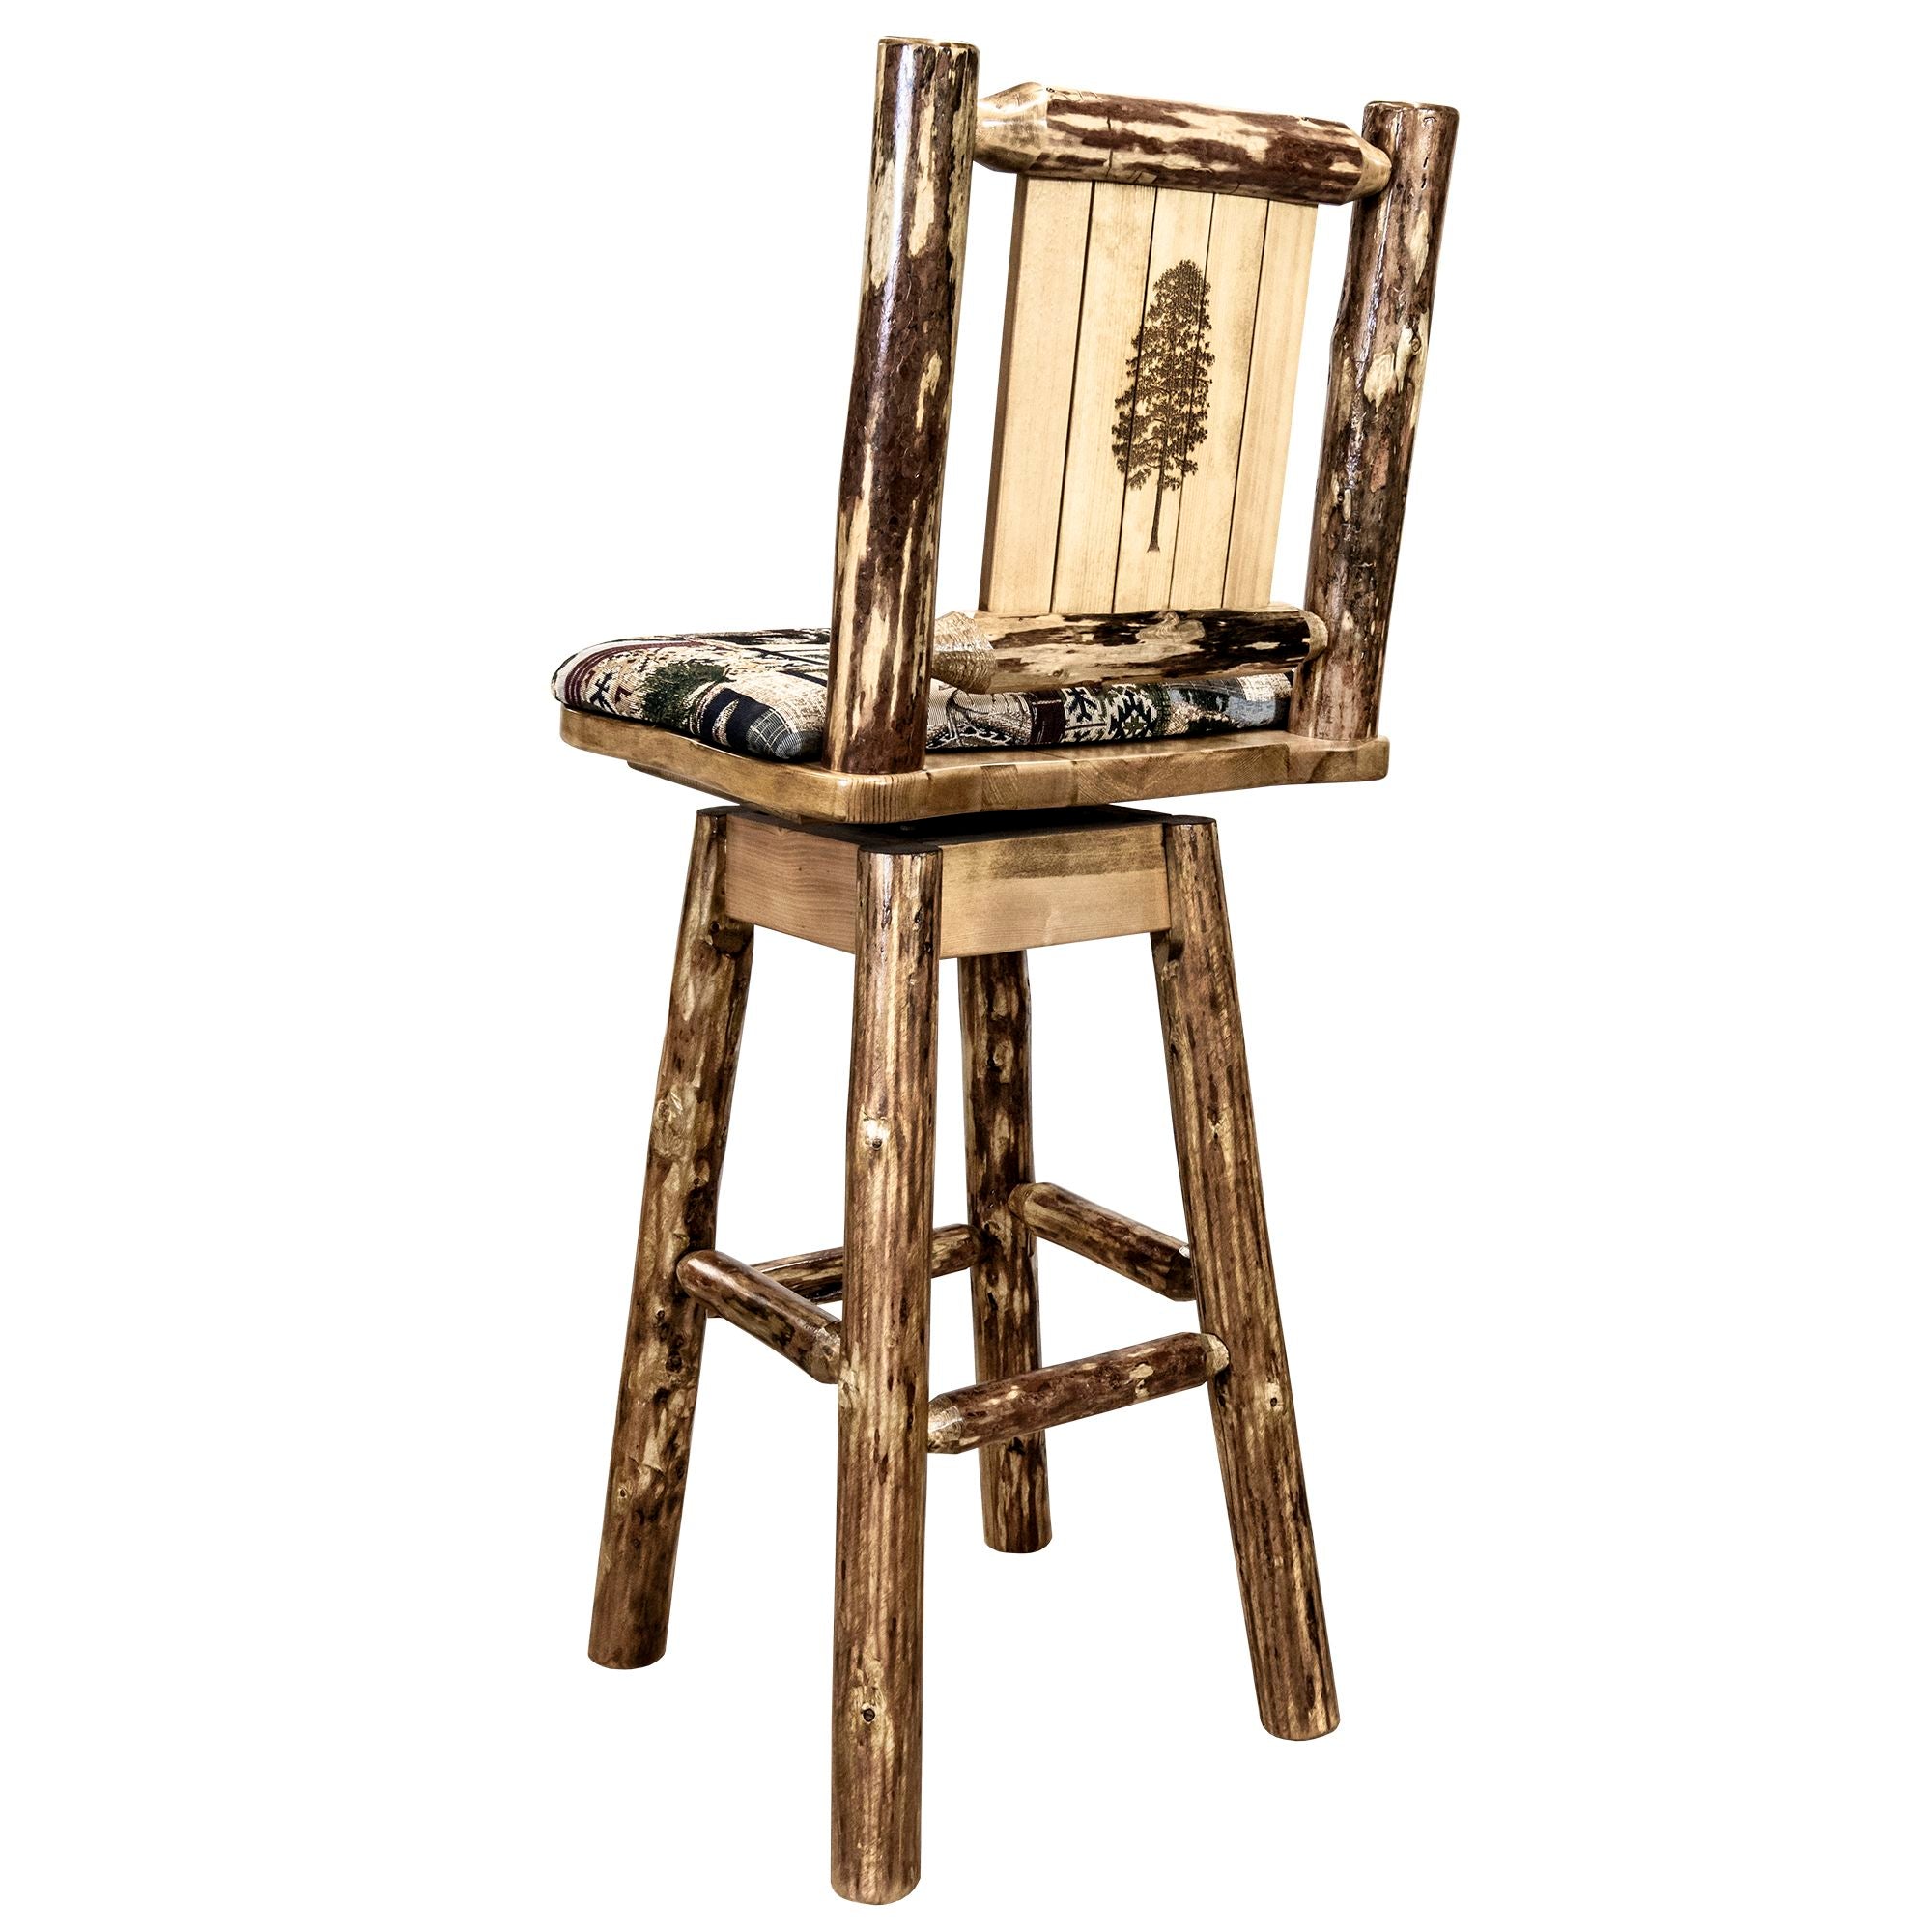 montana glacier country collection barstool with back swivel woodland pattern upholstery with laser engraved pinetree design mwgcbswsnrwoodlpine